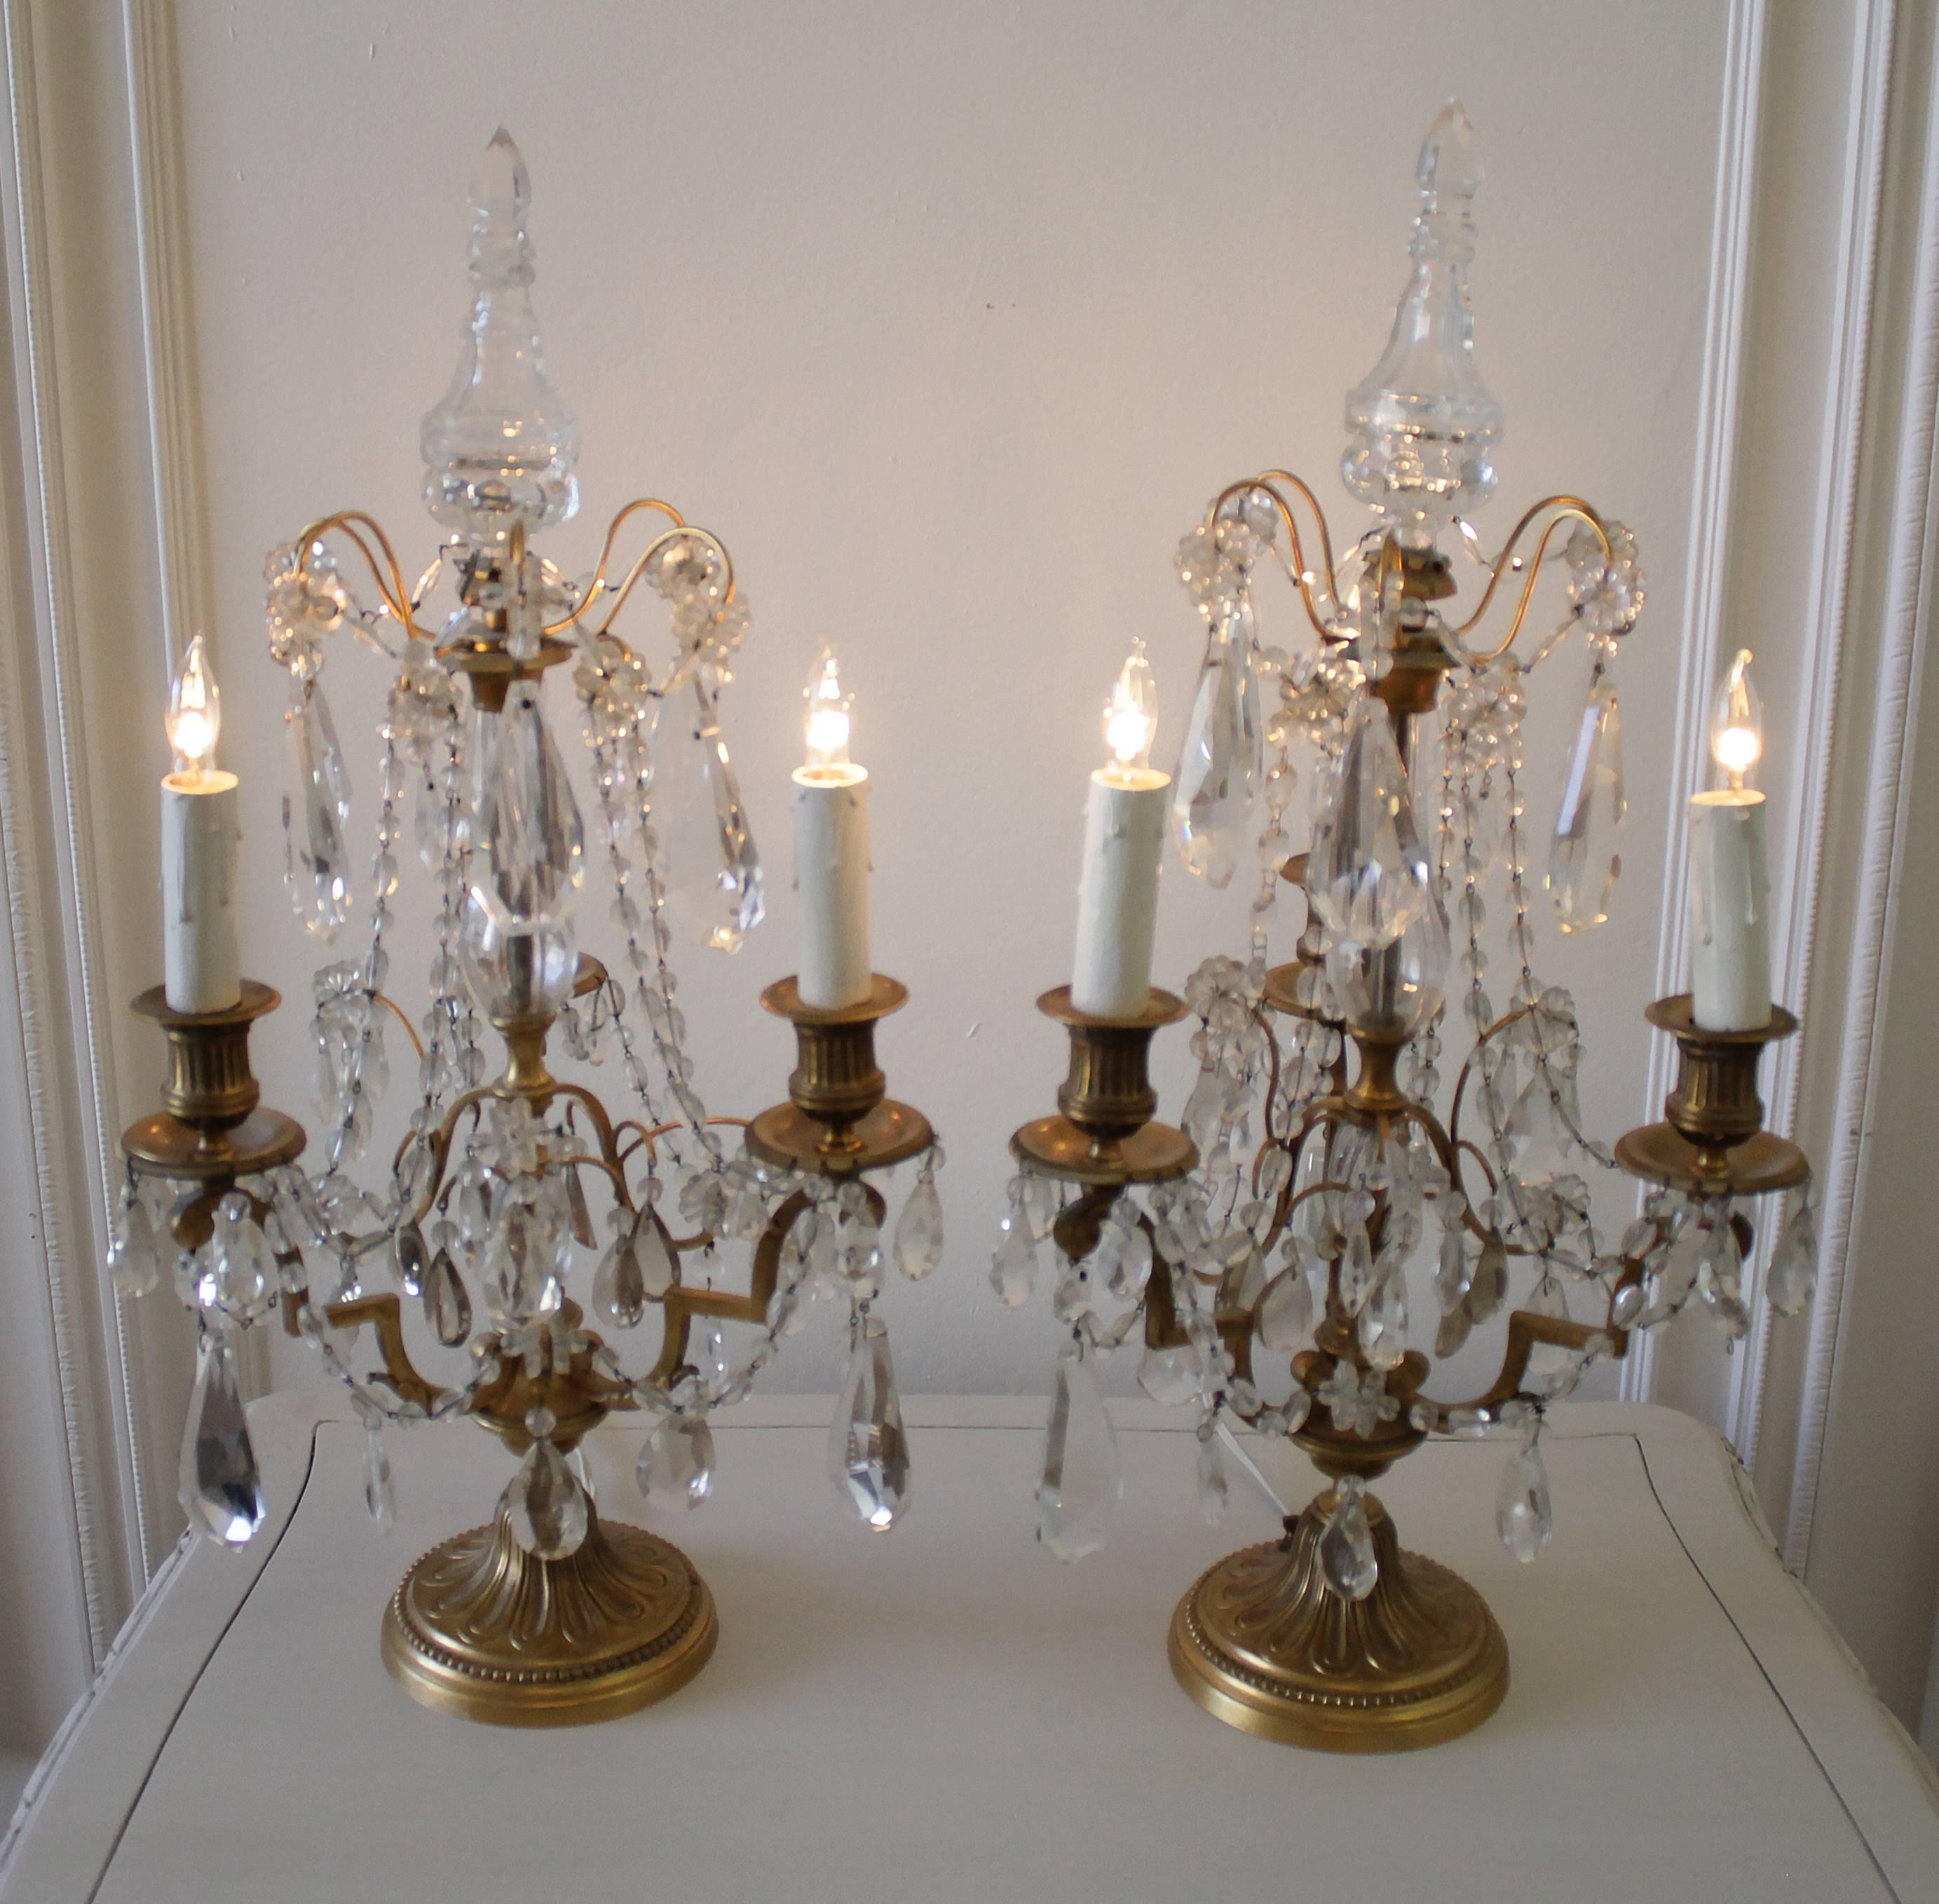 Stunning pair of three-light candelabra girandoles with clean crystal blown glass sections in the centers, extending to the top. Brass arms hold a lovely collection of clear crystal drops and soft pale topaz colored crystals and crystal florettes.